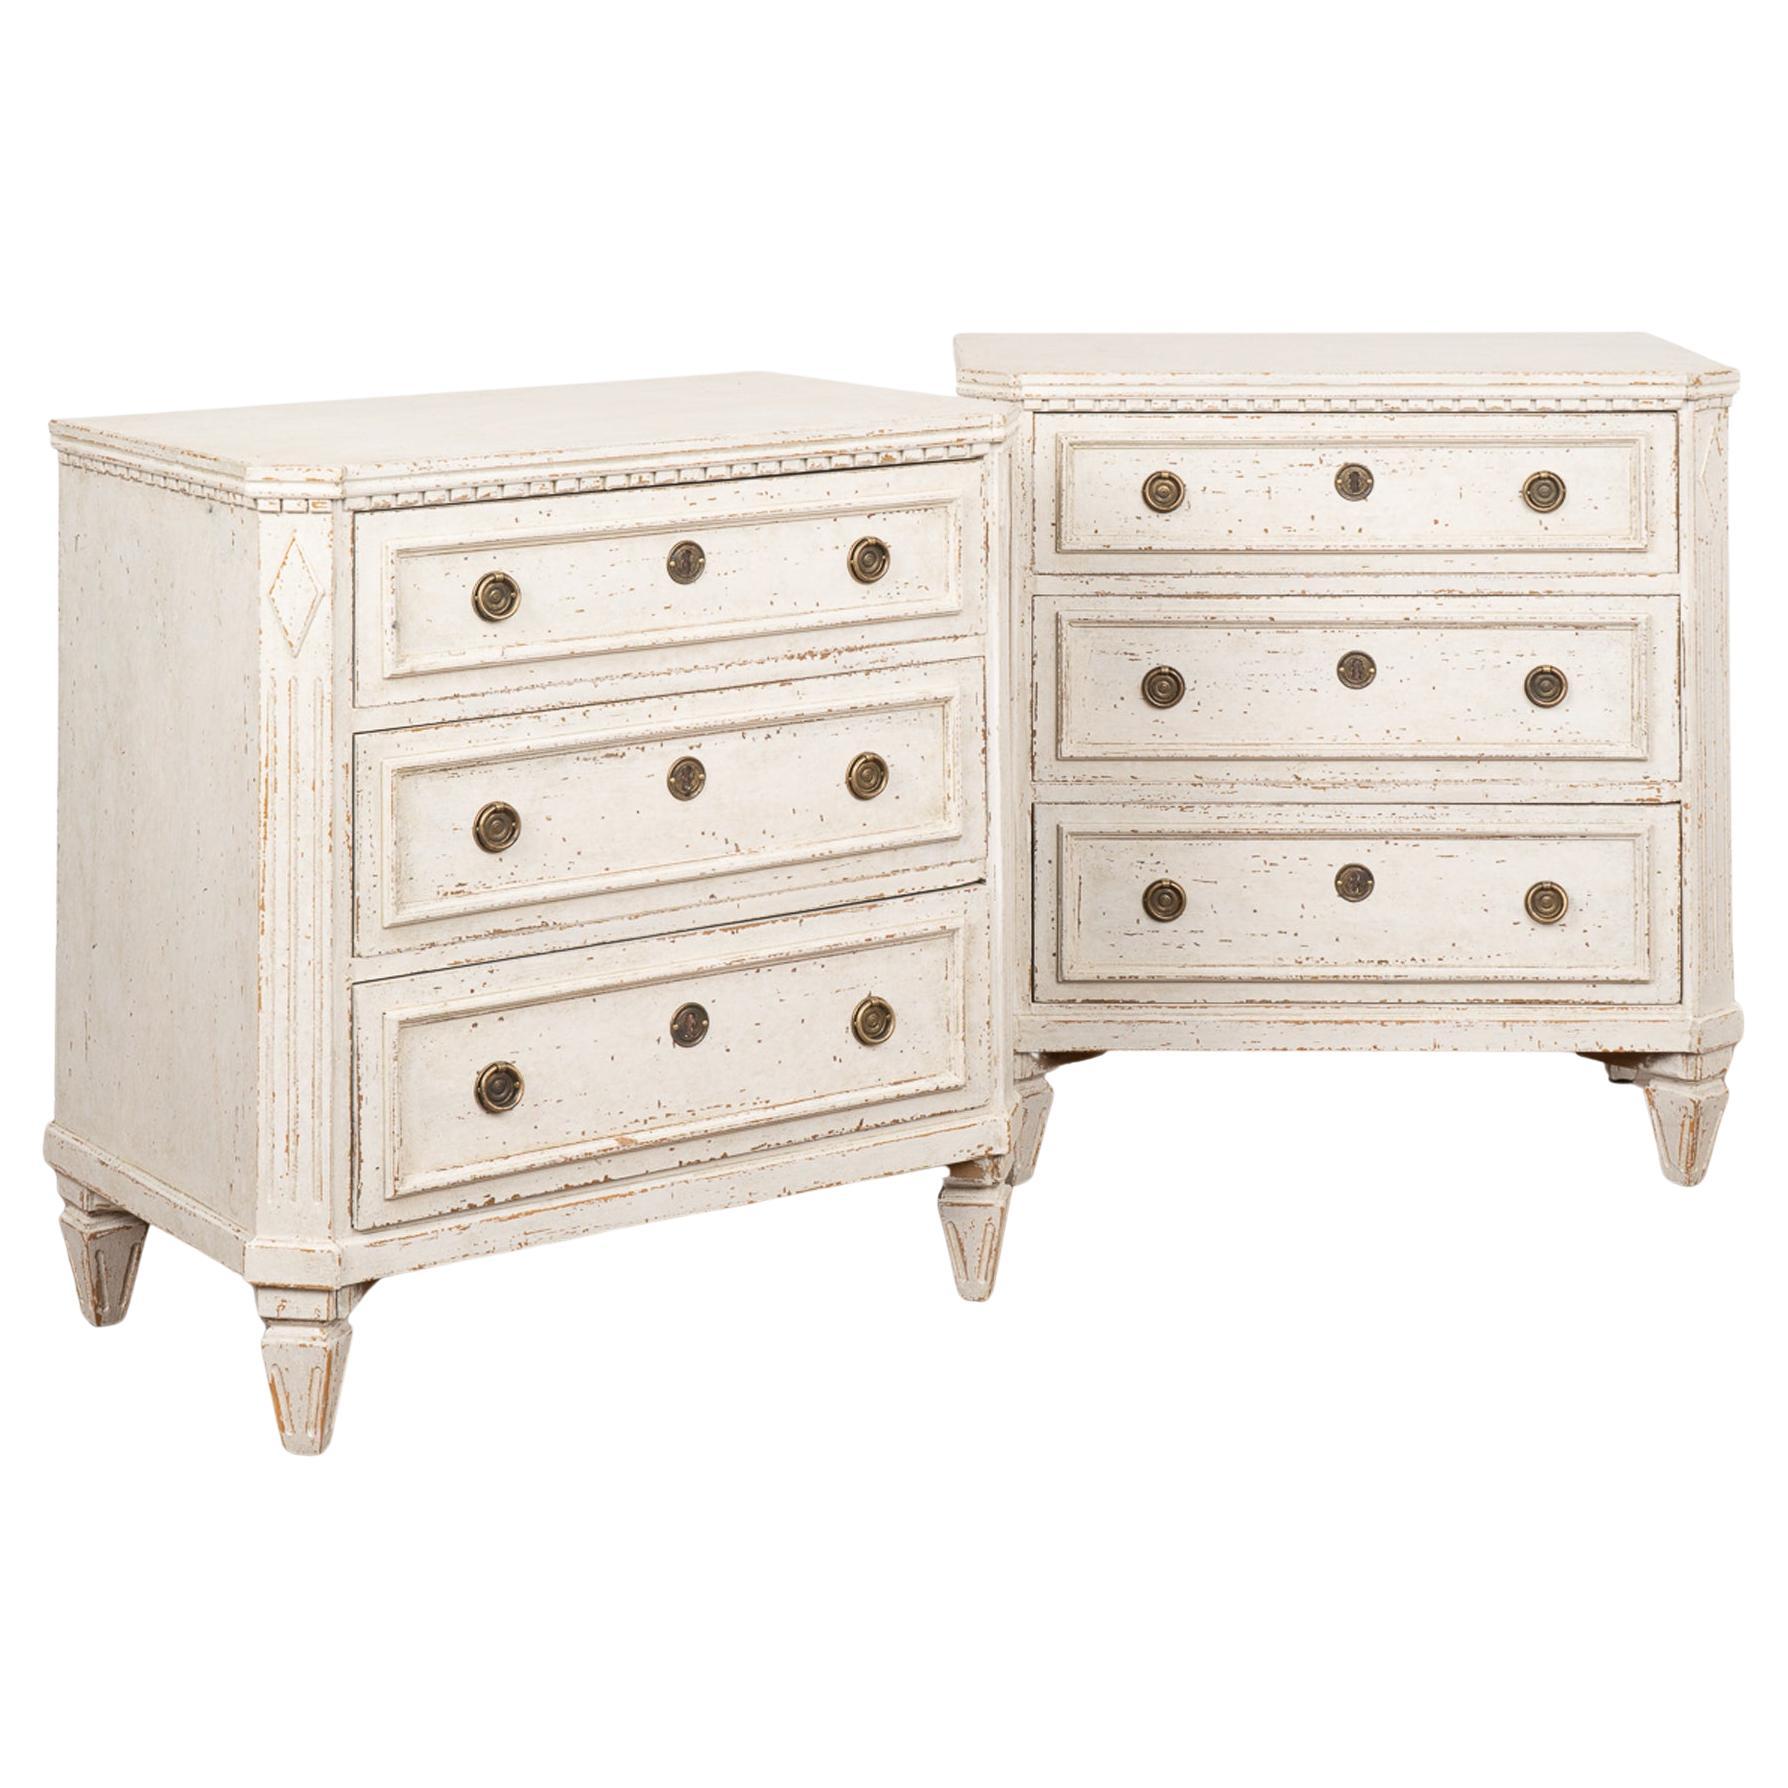 Pair, Small White Painted Gustavian Chest of Drawers, Sweden circa 1840-60